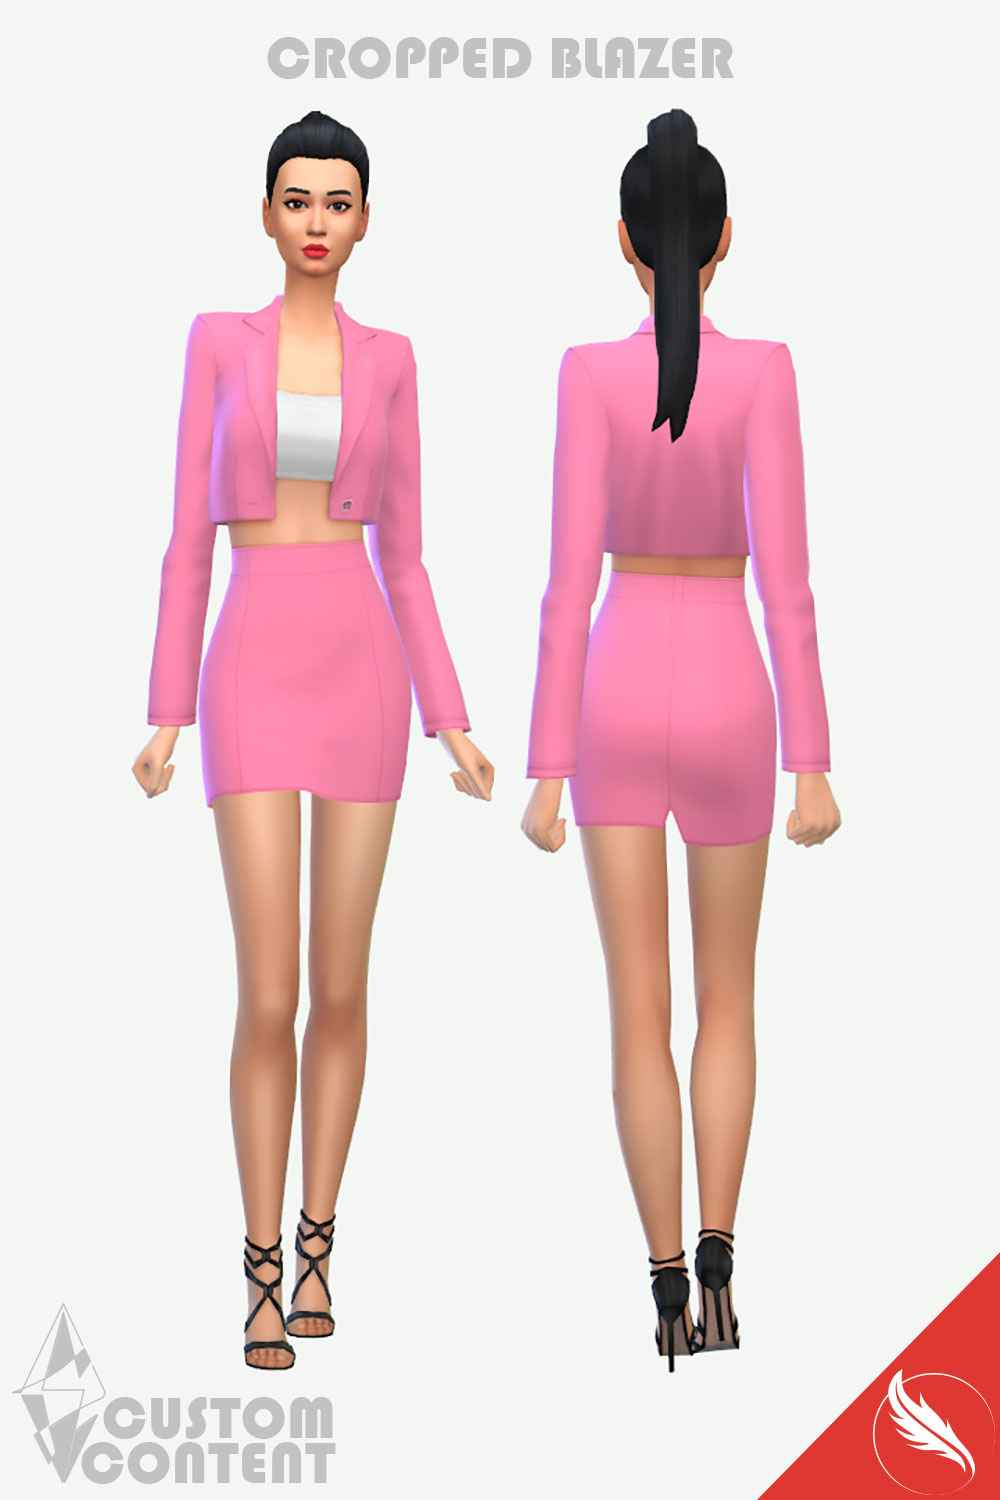 The Sims 4 Clothing CC Cropped Blazer